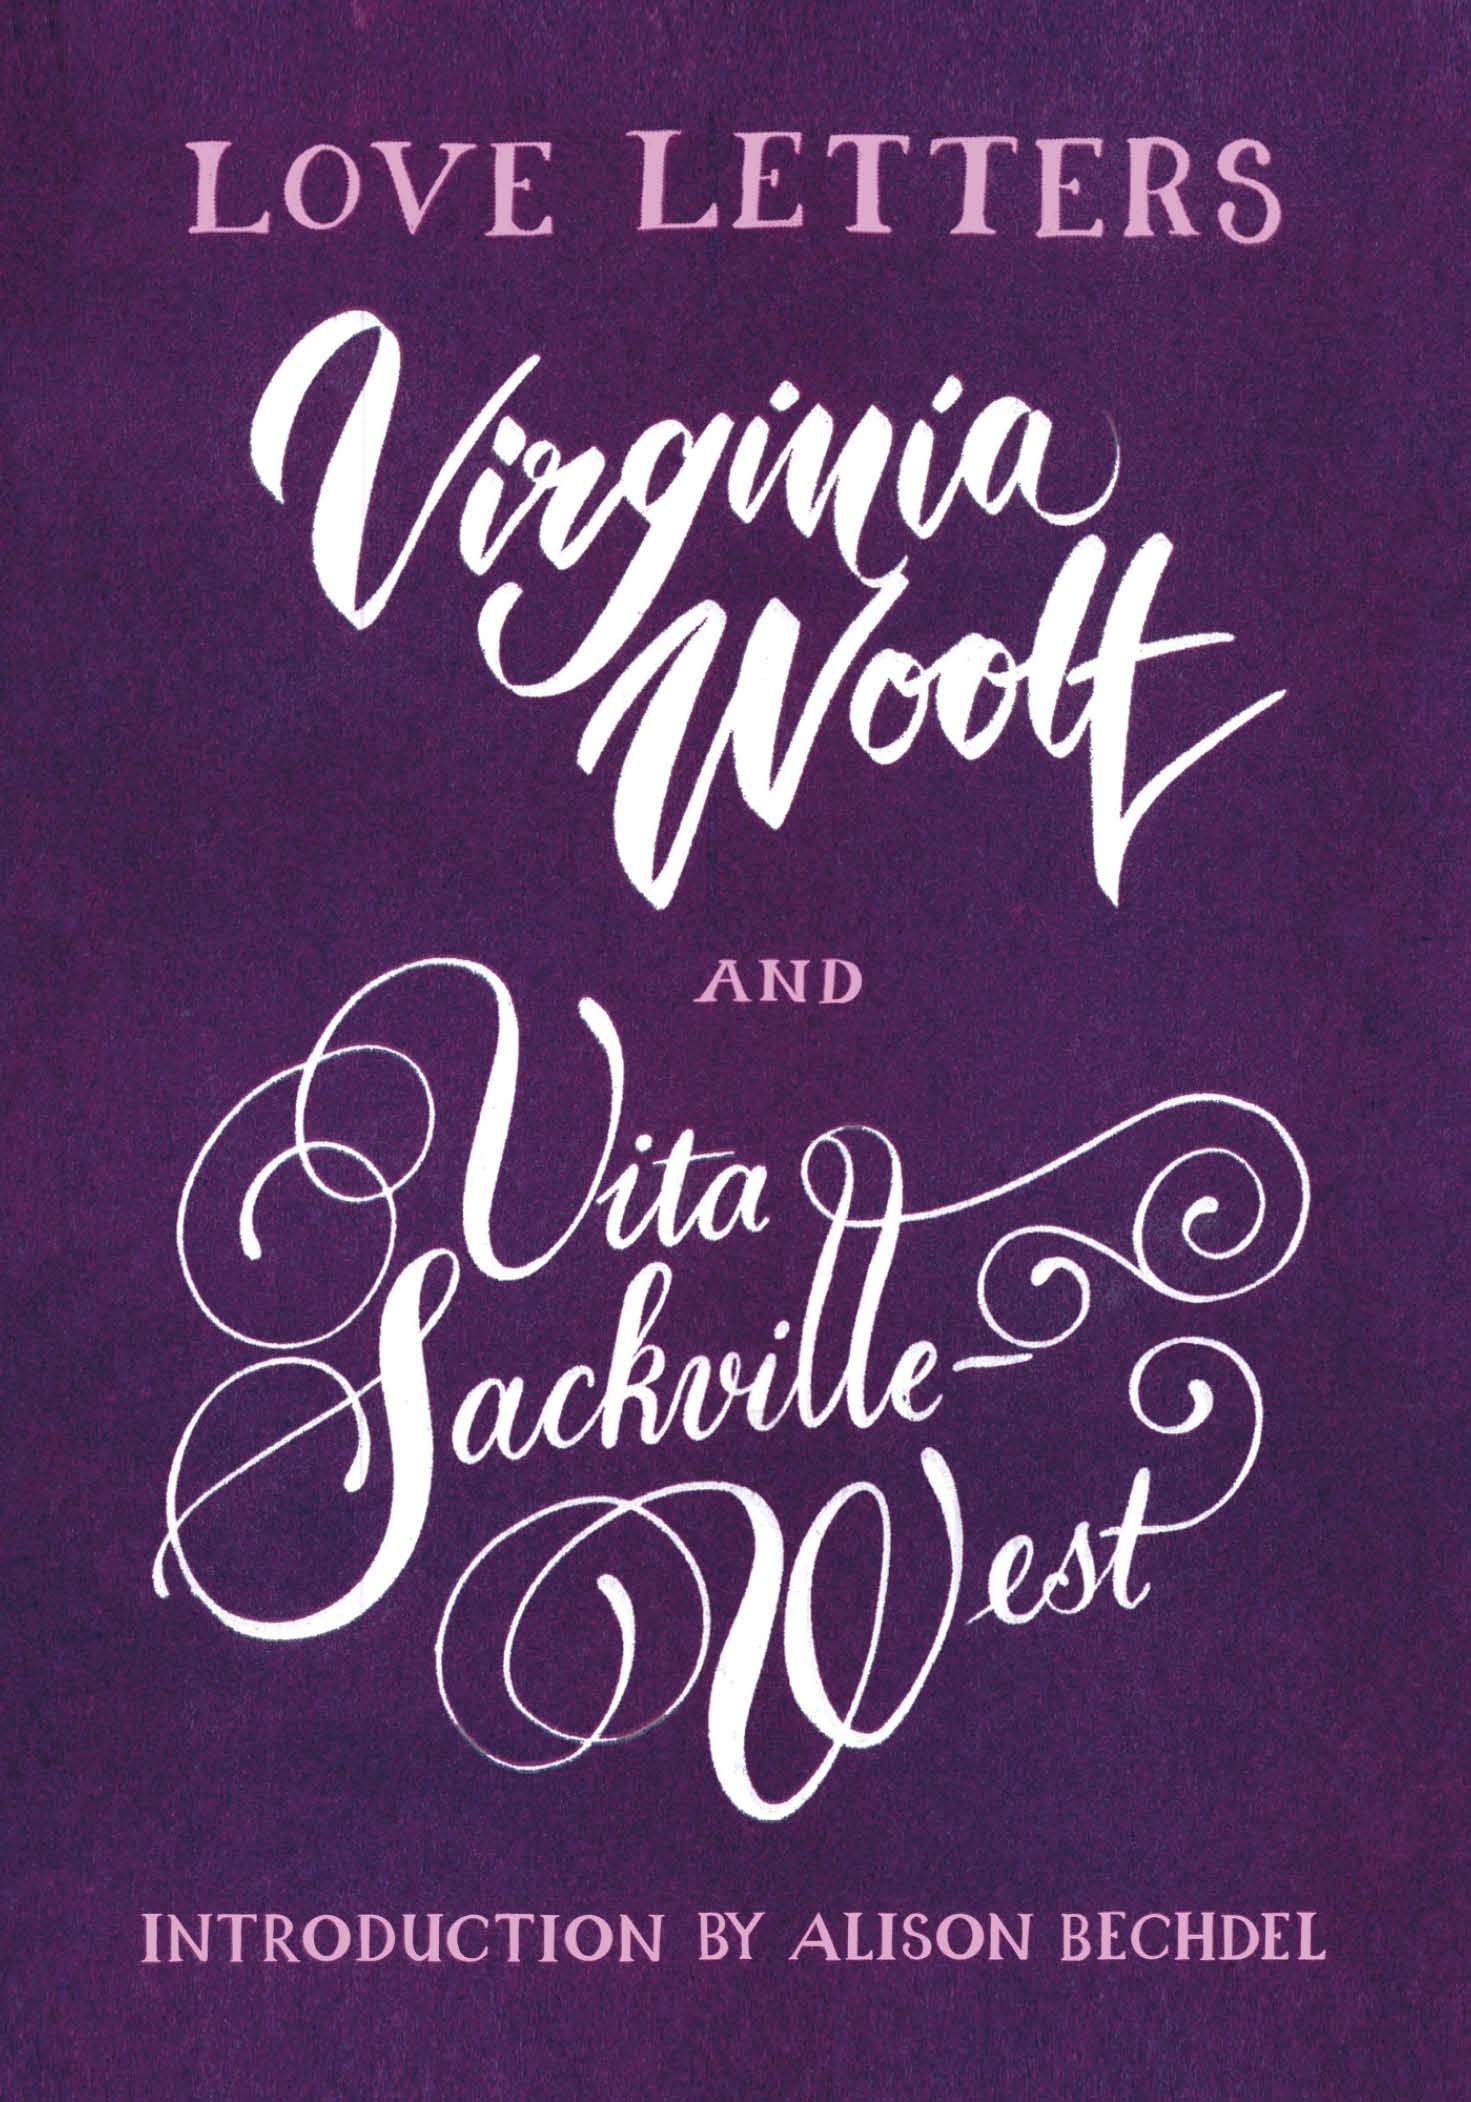 Book “Love Letters: Vita and Virginia” by Vita Sackville-West — February 4, 2021